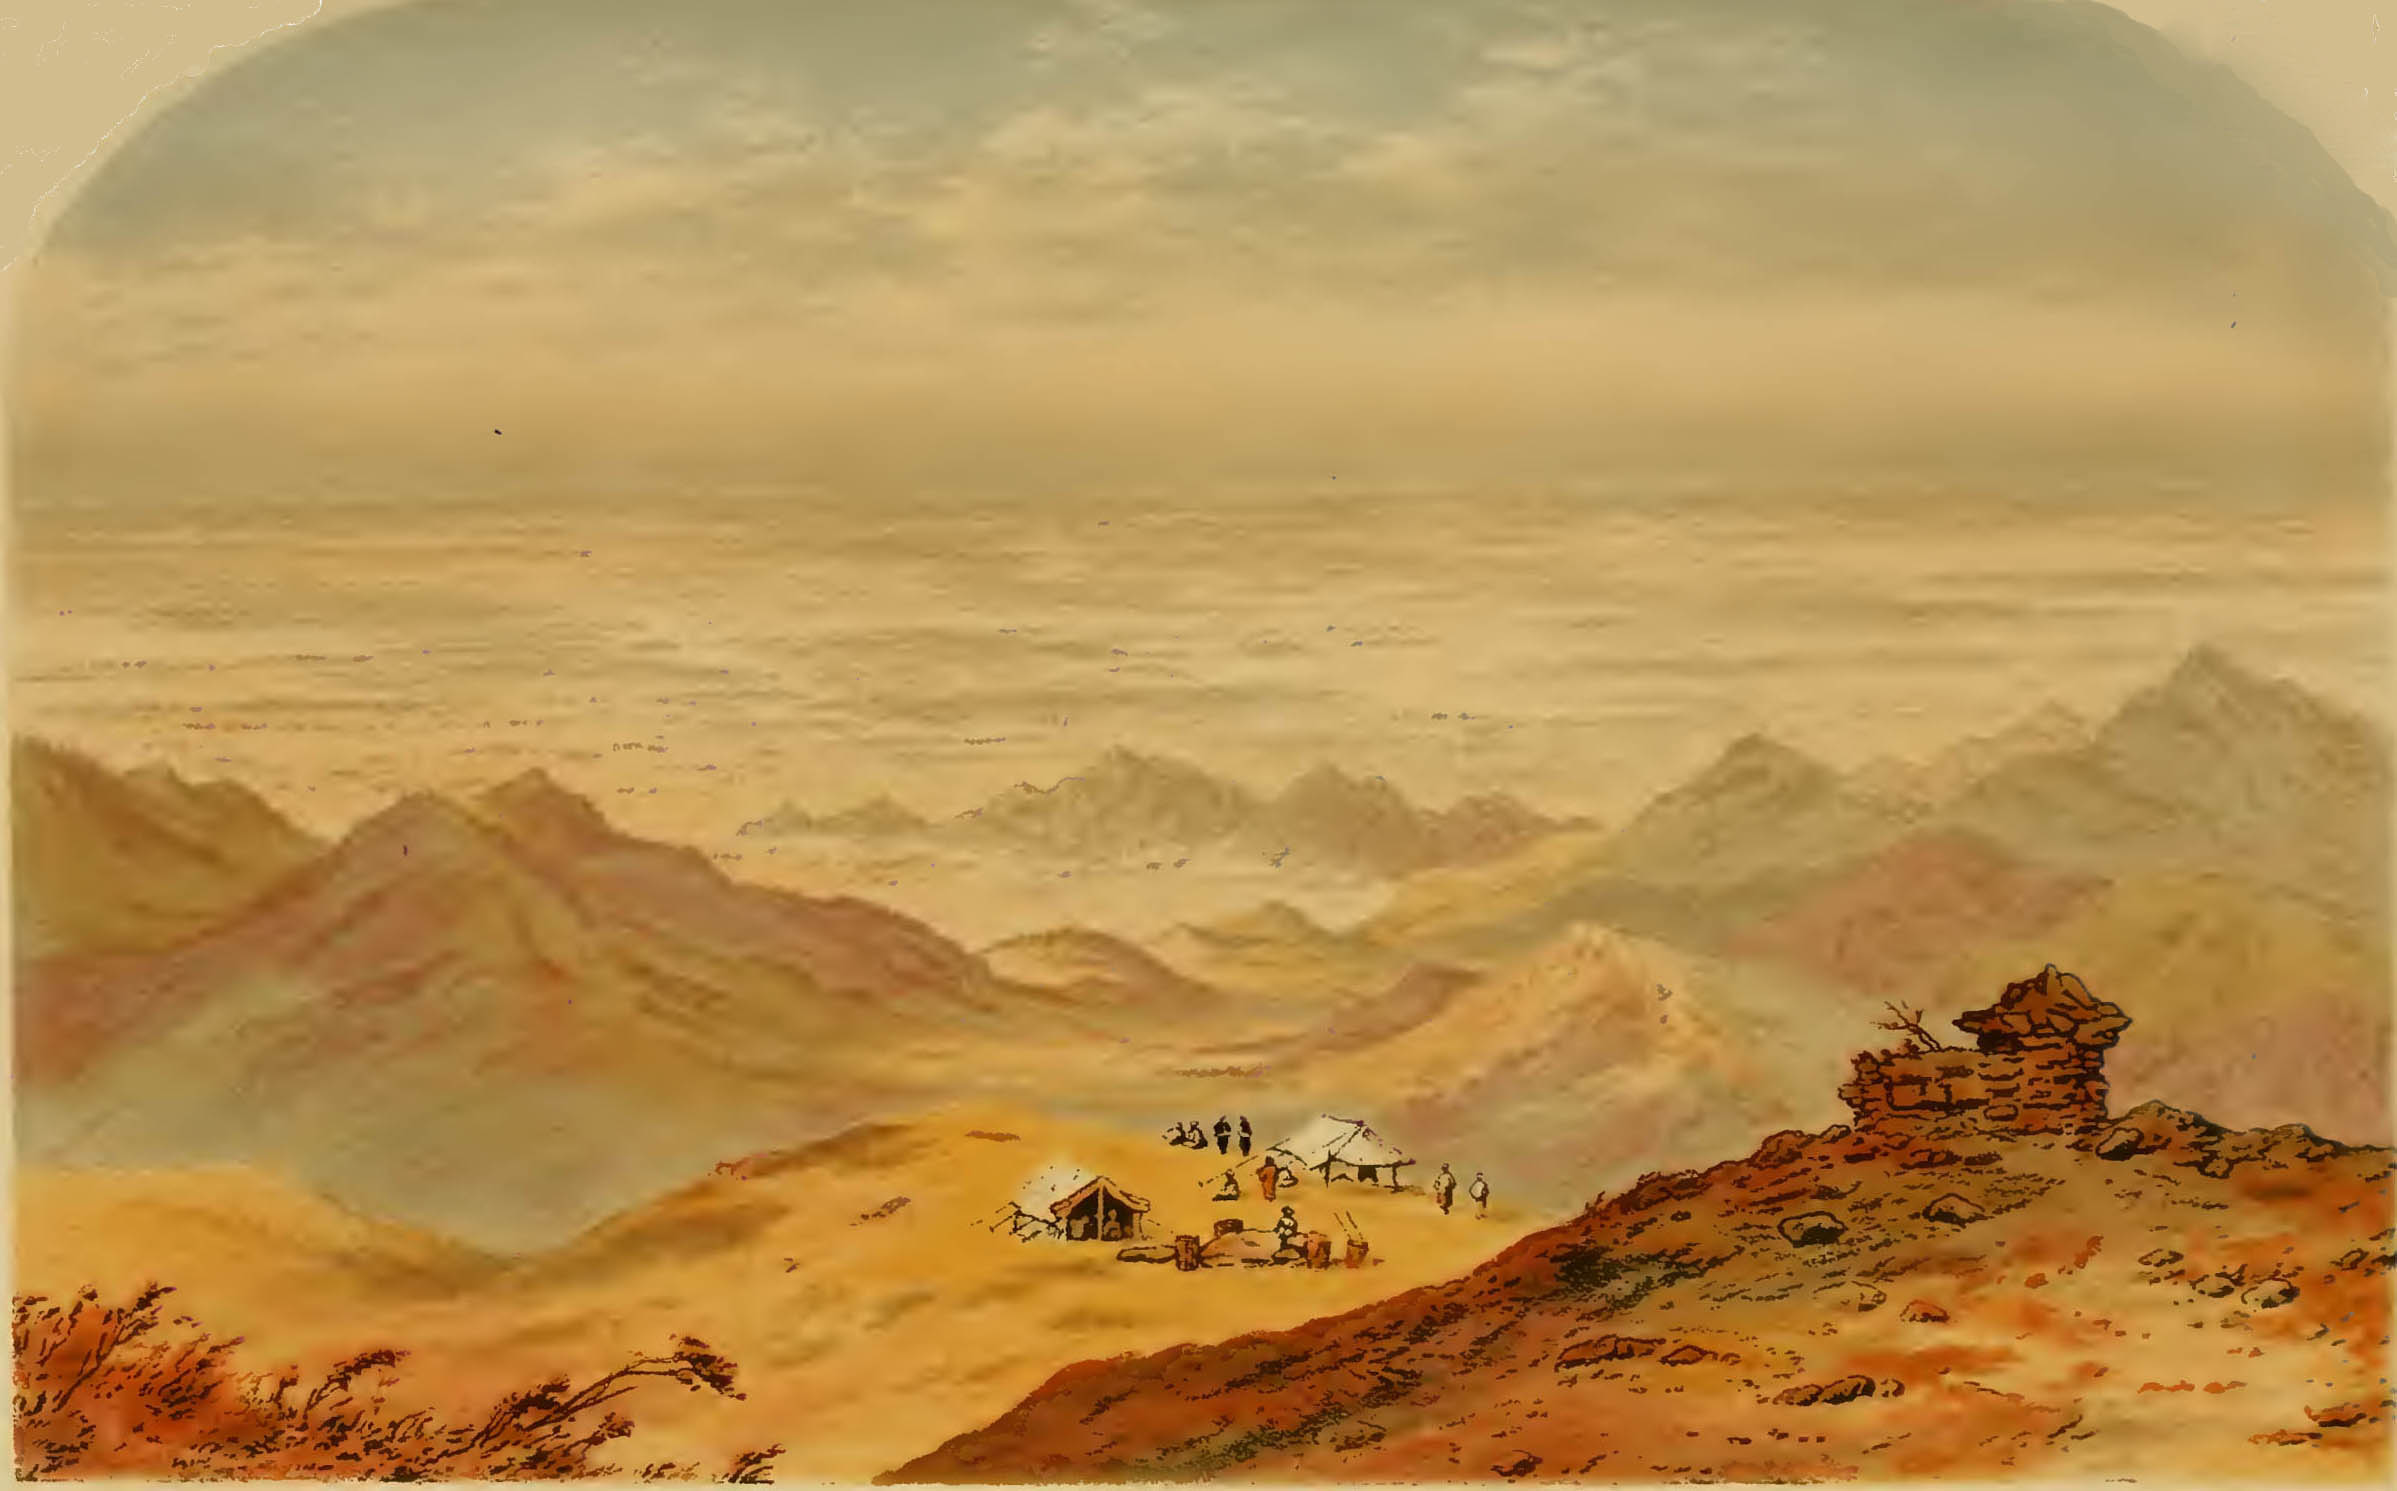 sandy plains with mountains in background, caption: The Plains of Nepaul, from Mt. Tongloo